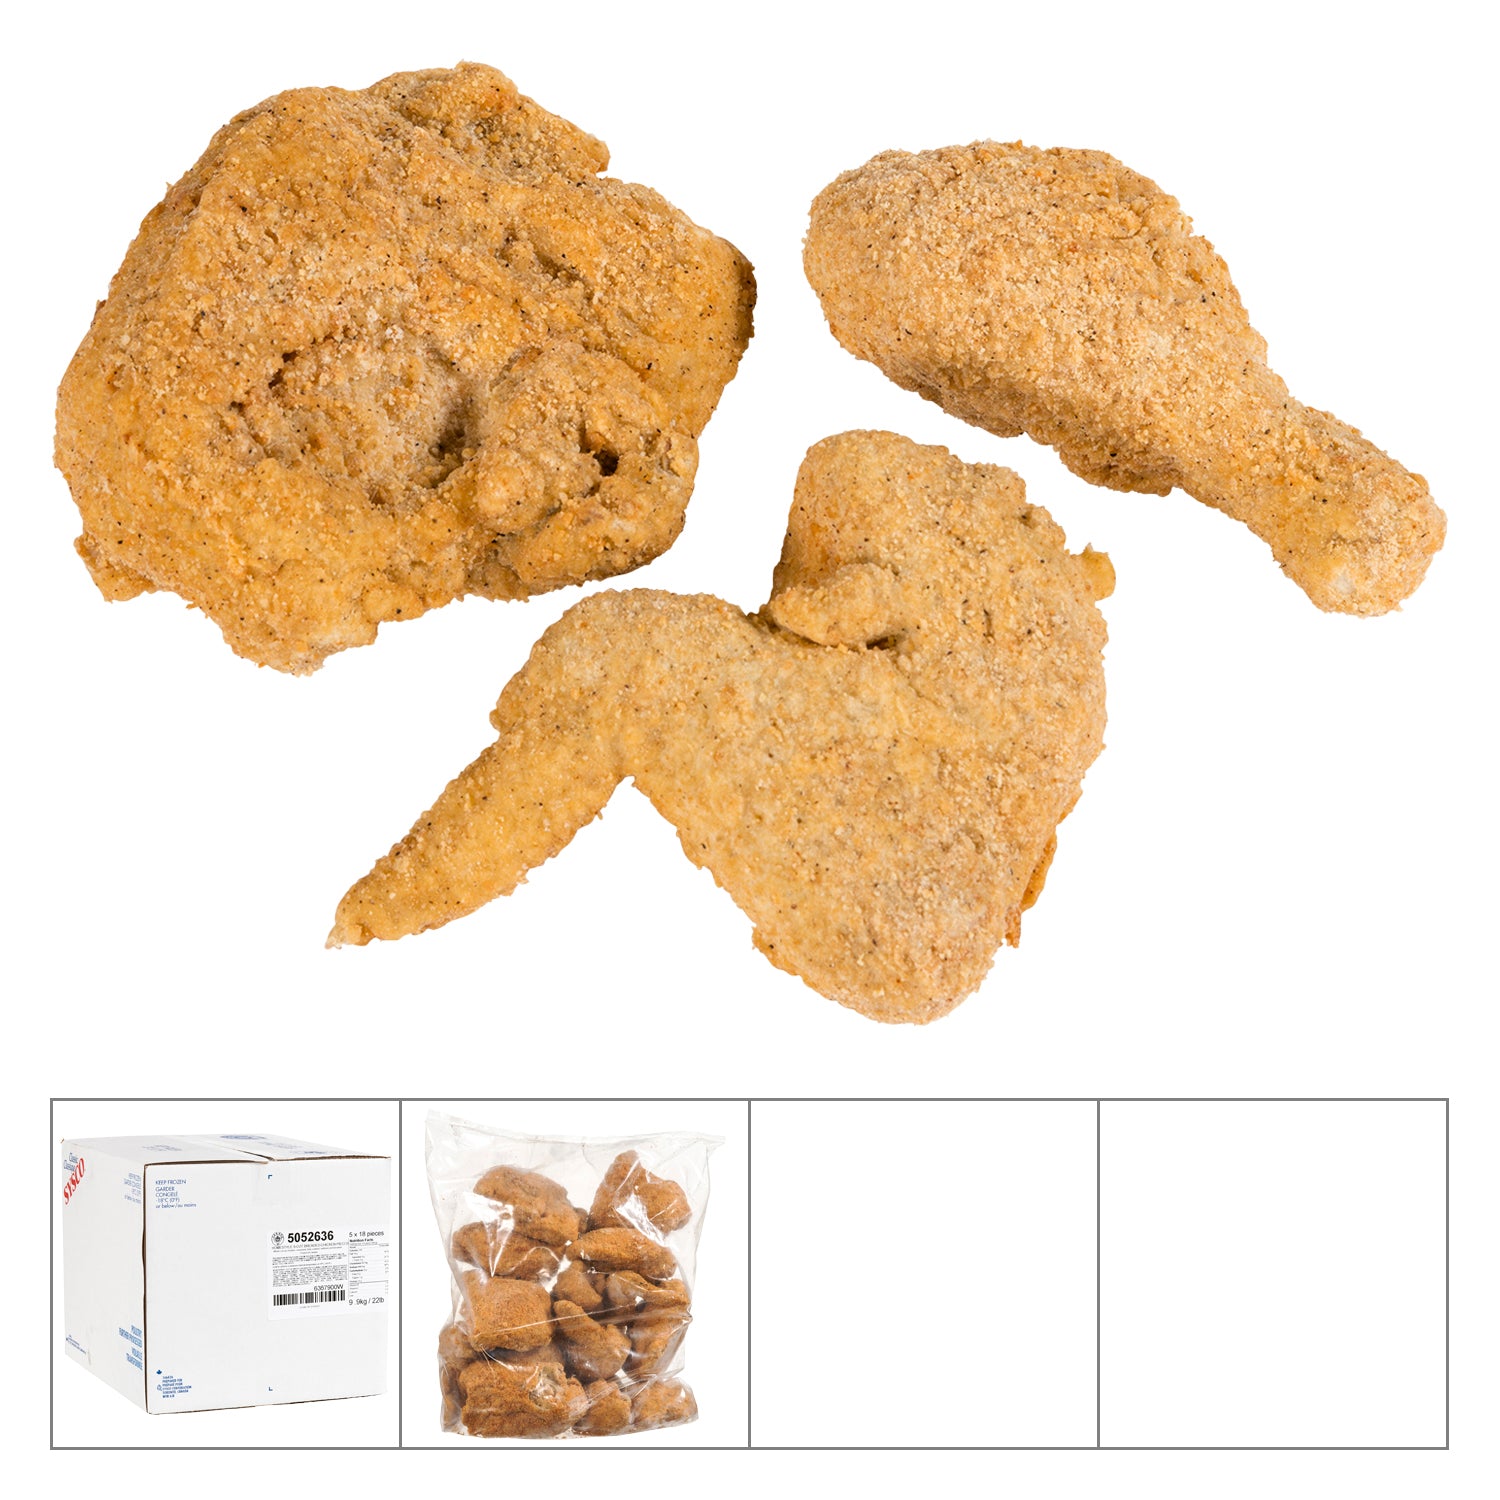 Sysco Classic Homestyle Breaded Crispy Chicken Fully Cooked 5x18ct [$1.77/ea]